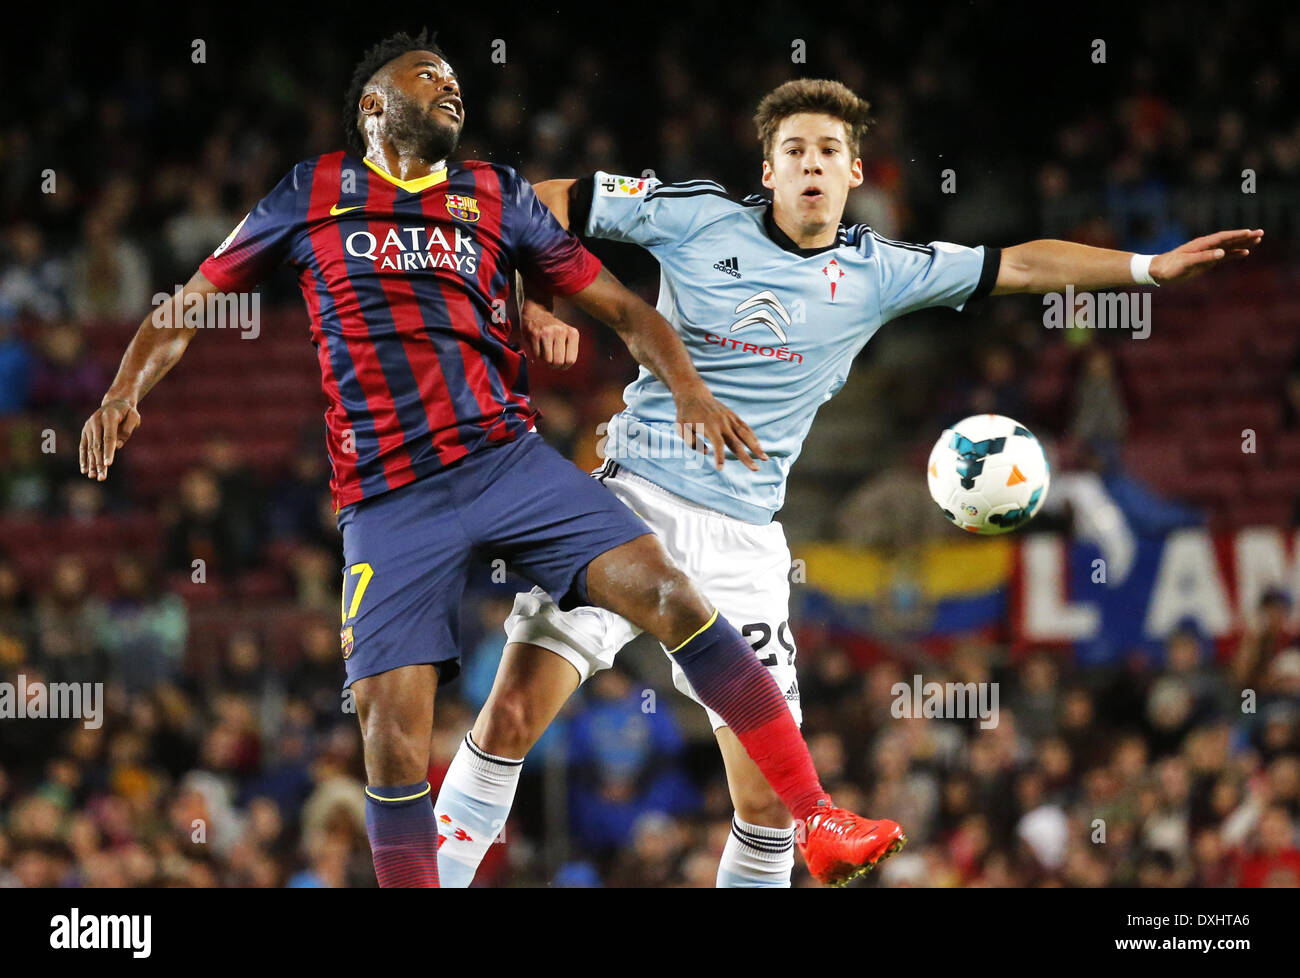 Barcelona, Spain. 26th Mar, 2014. Song and Santi Mina in the match between FC Barcelona and Celta Vigo week 30 of the spanish Liga BBVA, played at the Camp Nou, the March 26, 2014. Photo: Joan Valls /Urbanandsport /Nurphoto Credit:  Joan Valls/NurPhoto/ZUMAPRESS.com/Alamy Live News Stock Photo